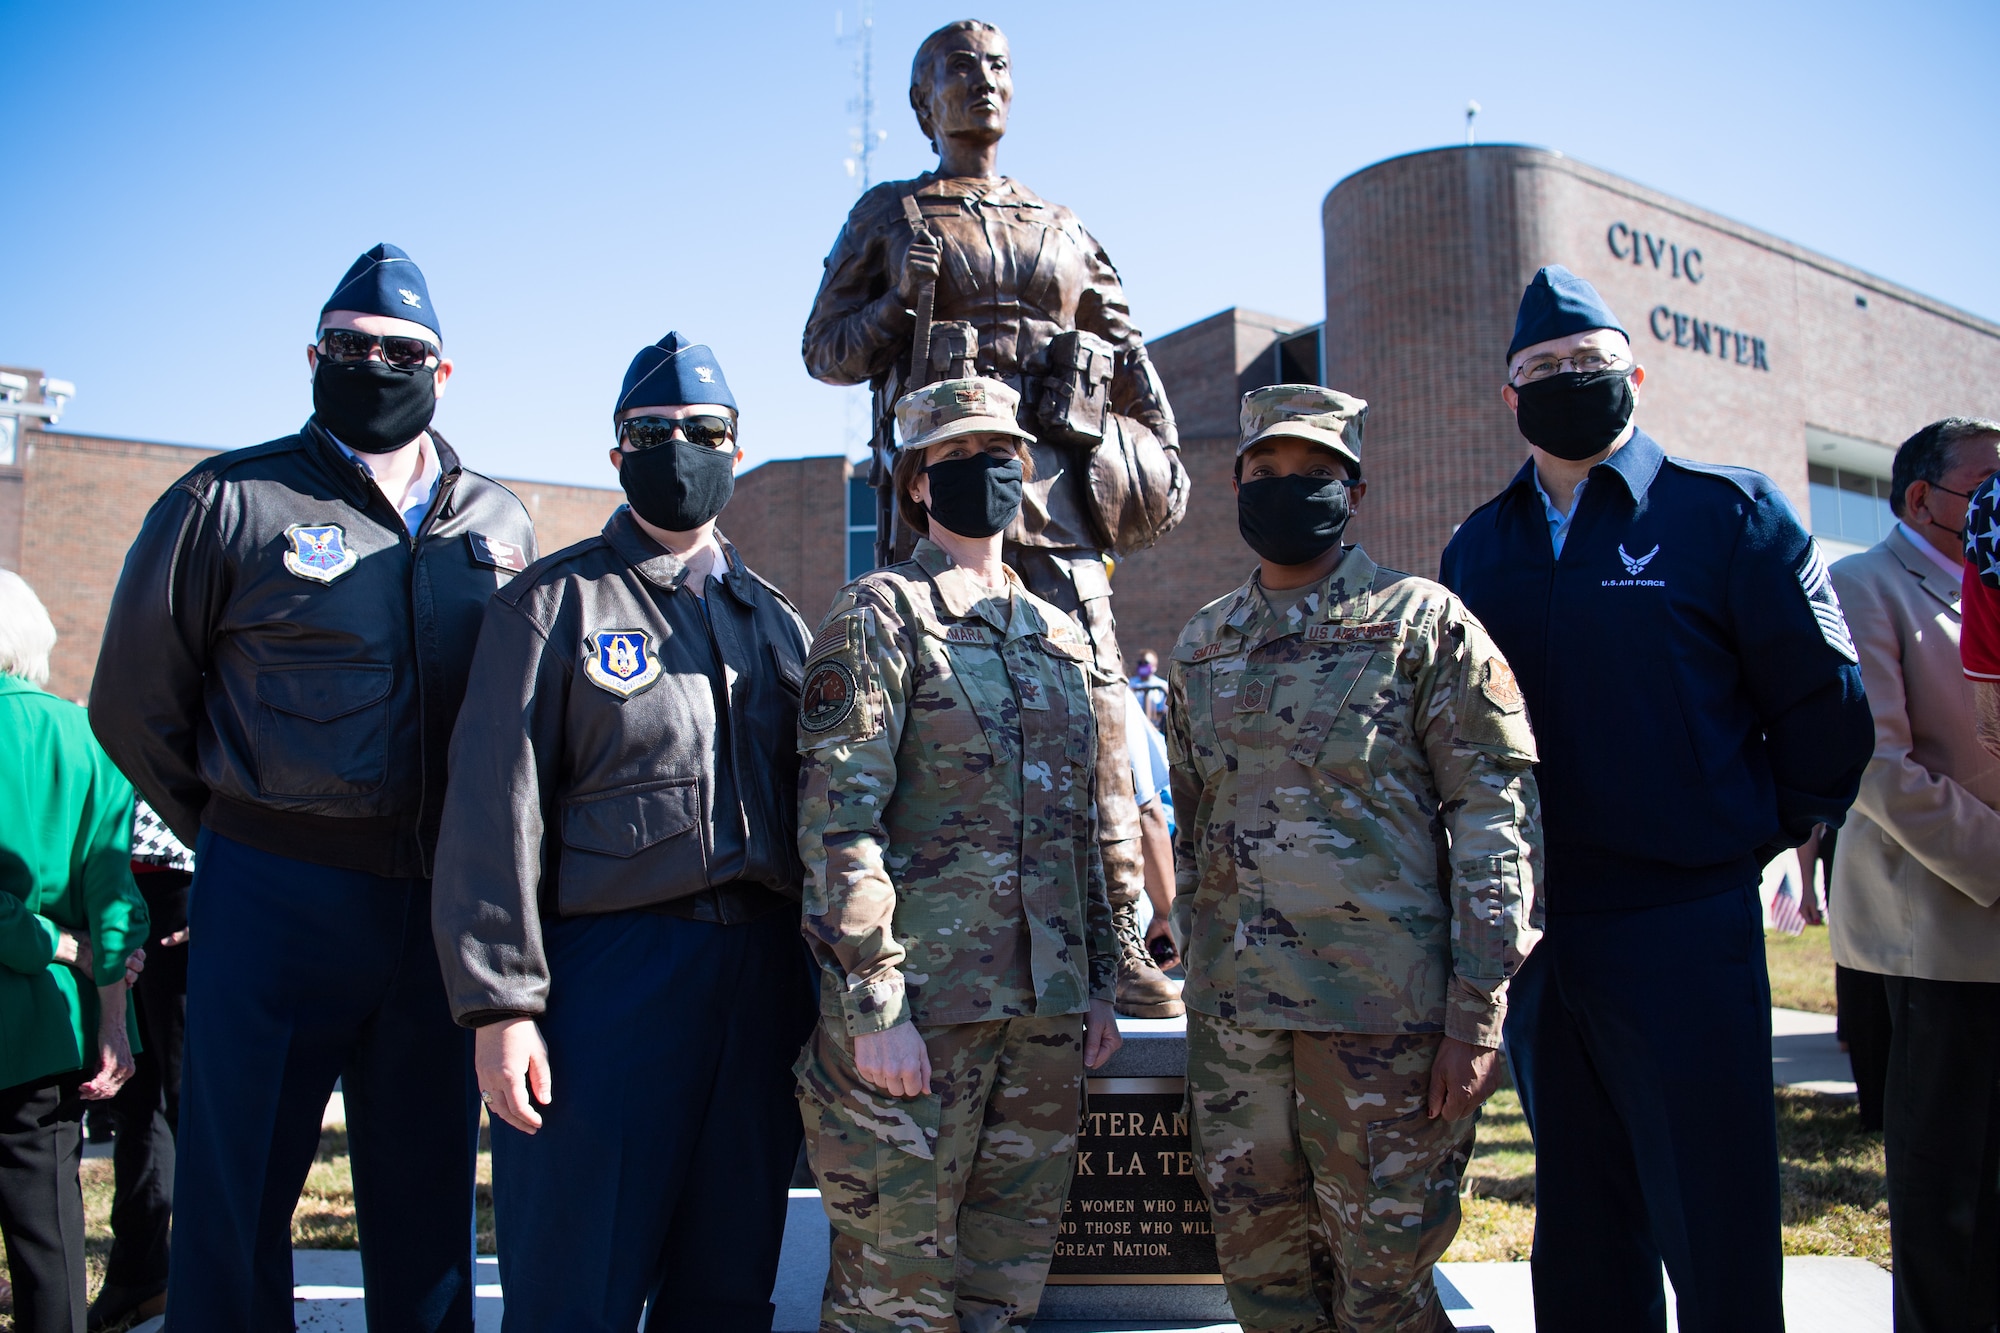 Leaders from Barksdale Air Force Base, La., pose for a photo in front of the newly unveiled Women Veterans of the Ark-La-Tex statue at the Bossier City Civic Center in Bossier City, La., Nov. 11, 2020. The statue was unveiled during a Veteran's Day celebration at the Bossier City Civic Center. (U.S. Air Force photo by Airman 1st Class Jacob B. Wrightsman)